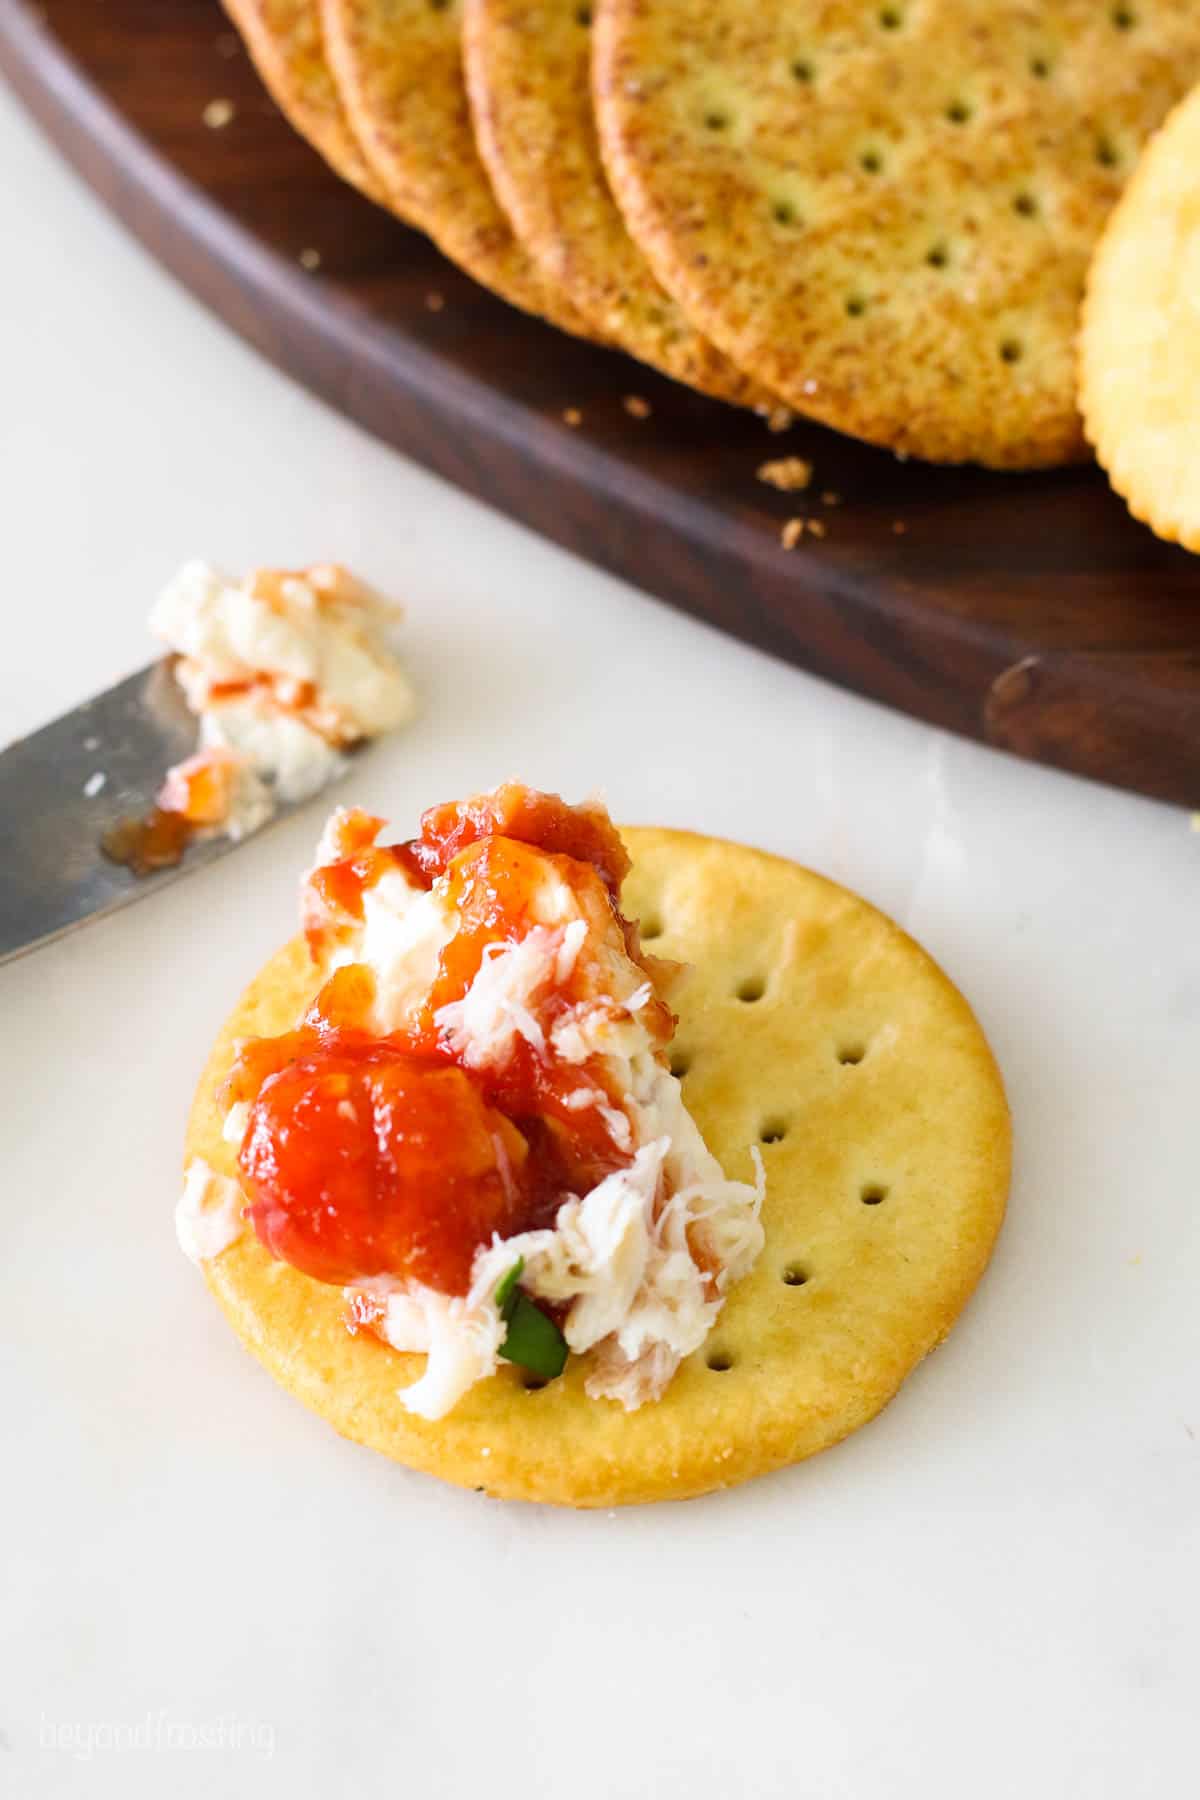 Cold crab dip spread on a butter cracker